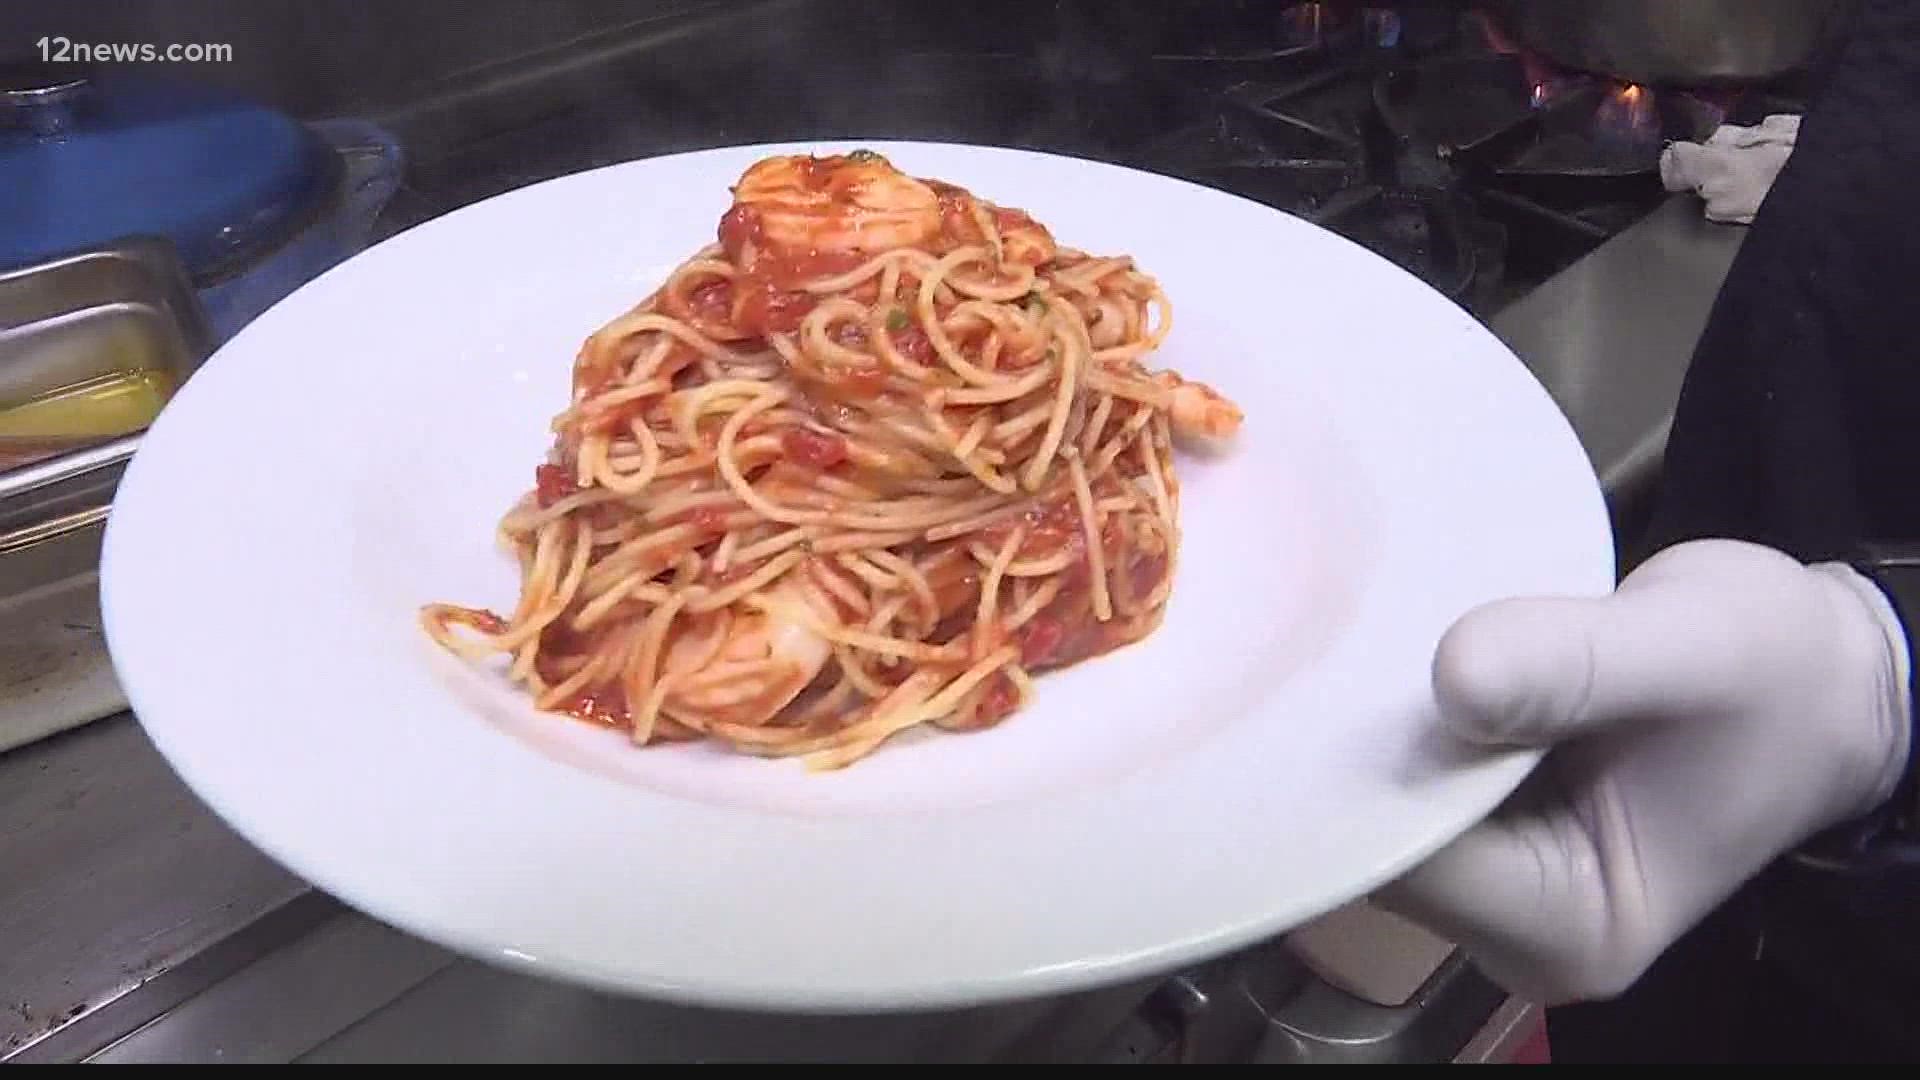 Anzio's Italian Restaurant in Phoenix serves up more than 11,000 plates of spaghetti. But not that long ago spaghetti wasn't easily available in Arizona.